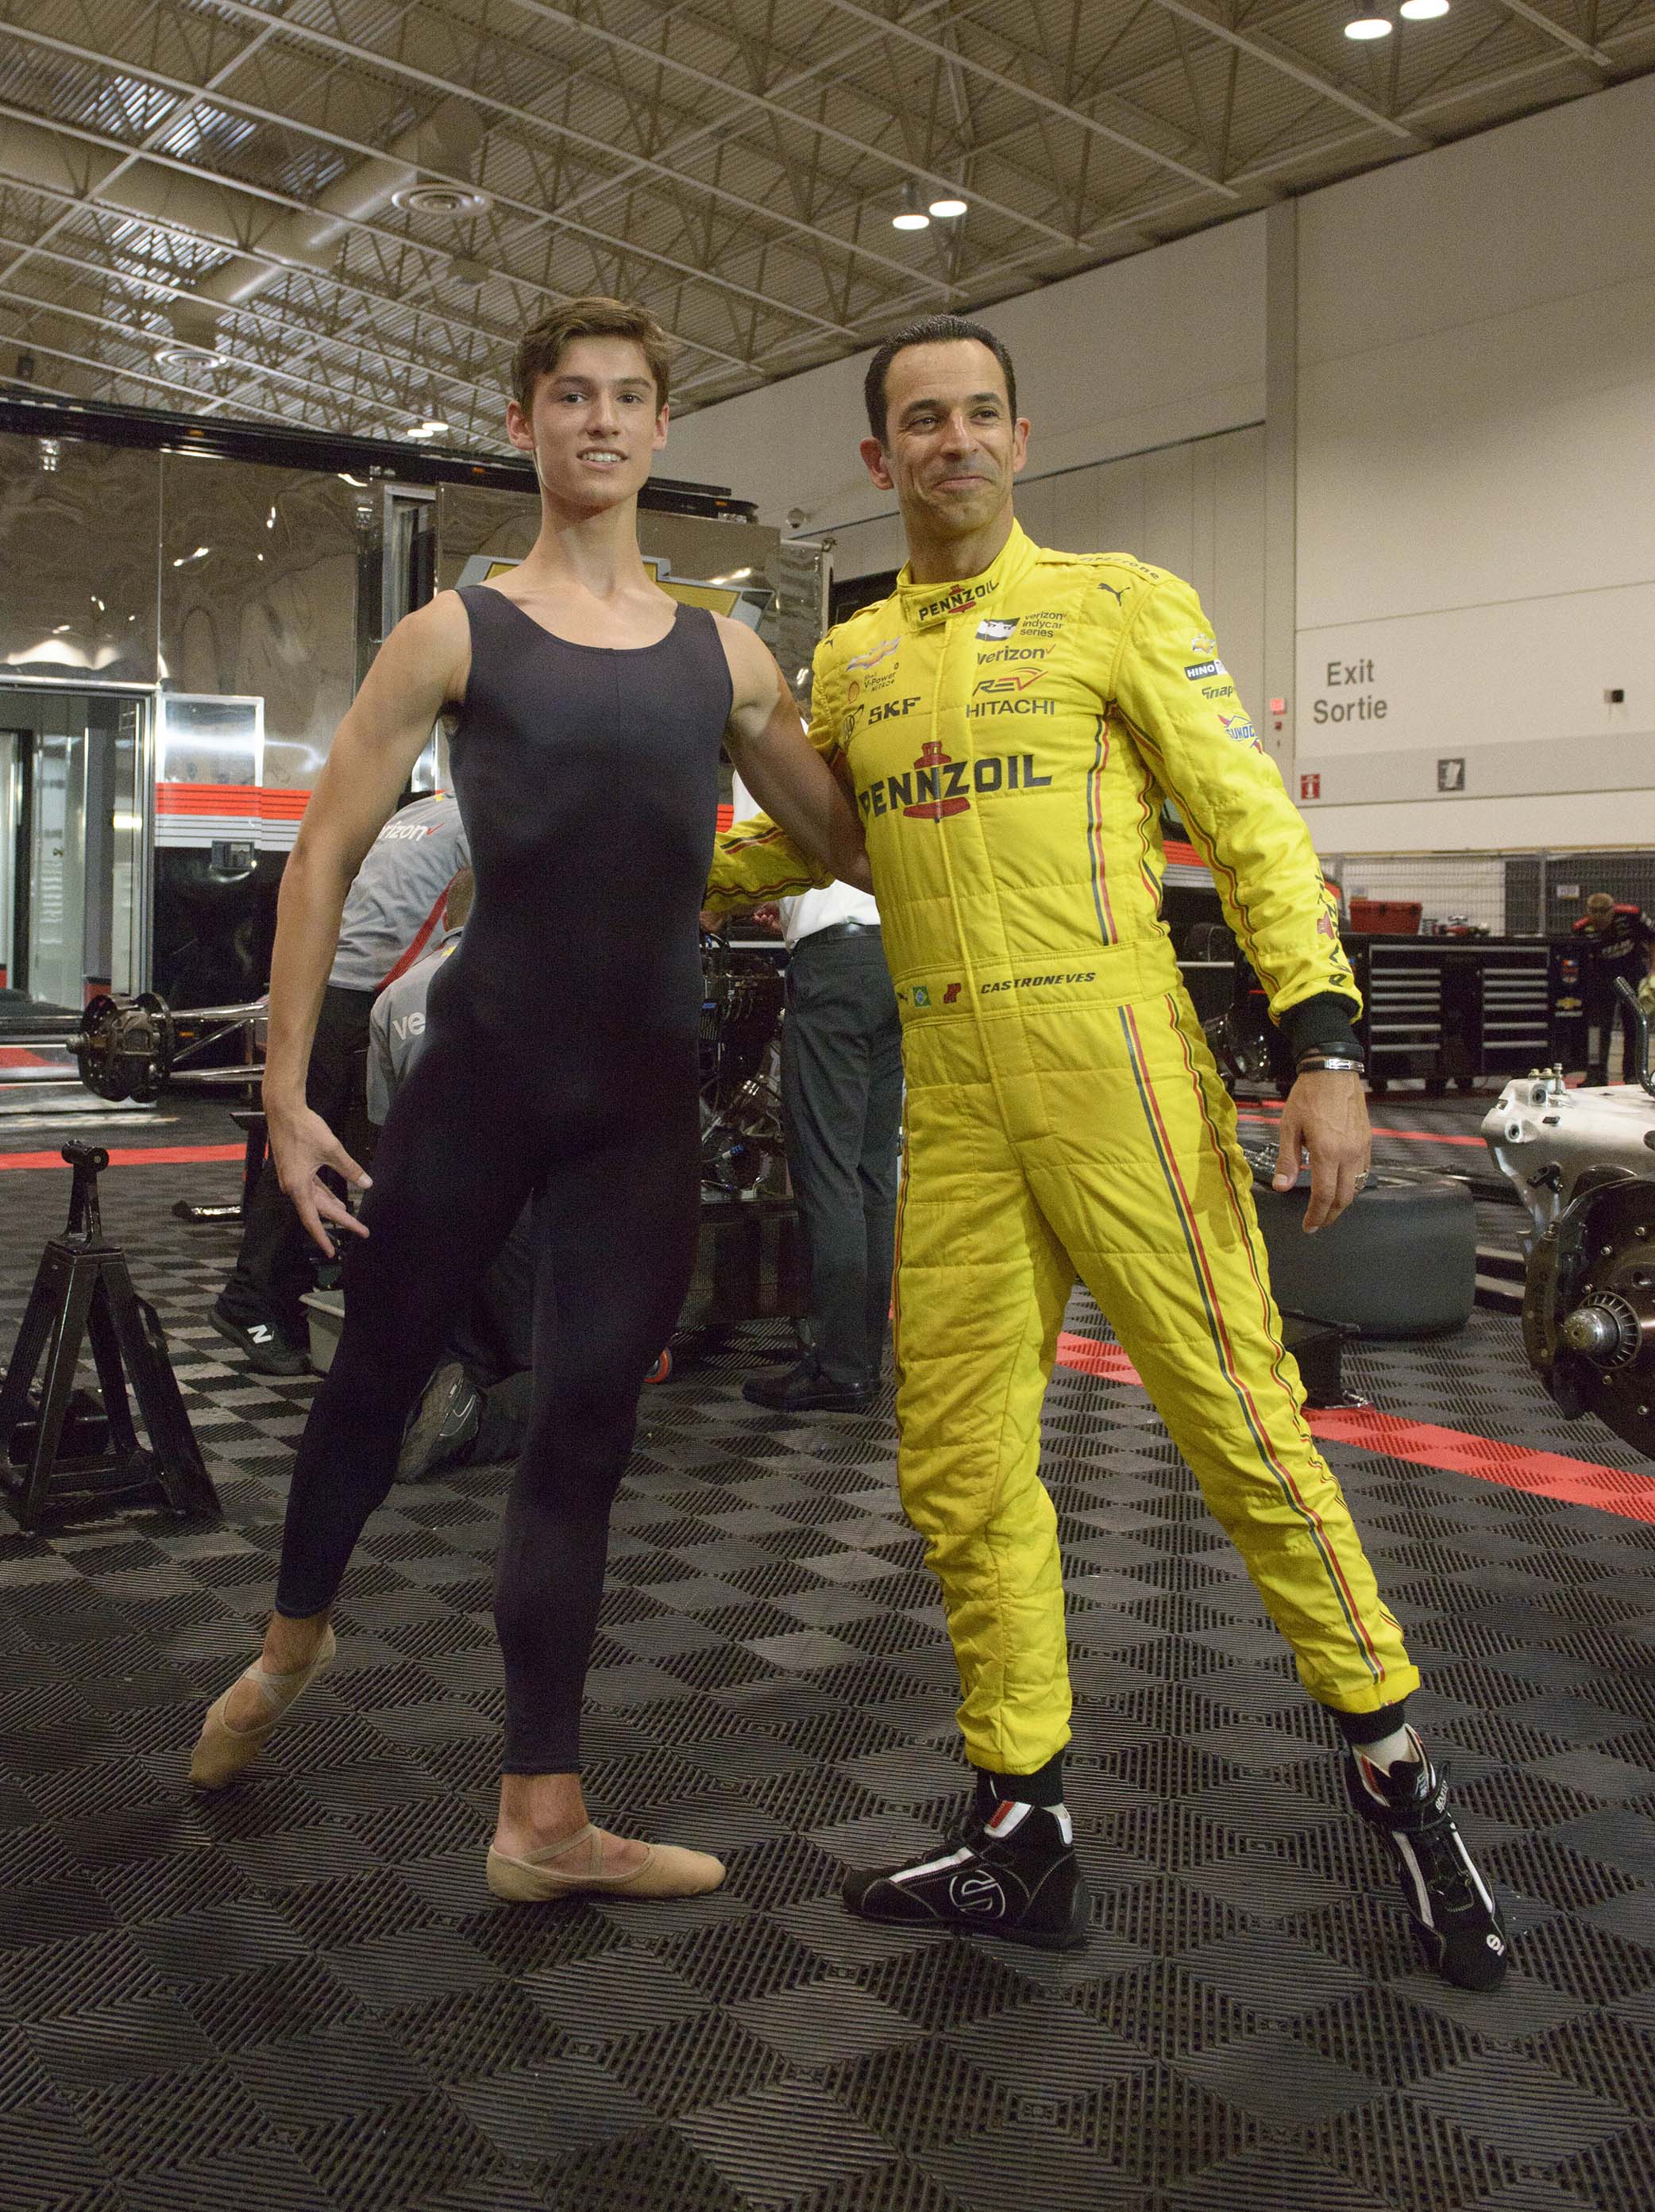 Helio Castroneves ‘On Pointe’ Both On & Off The Track